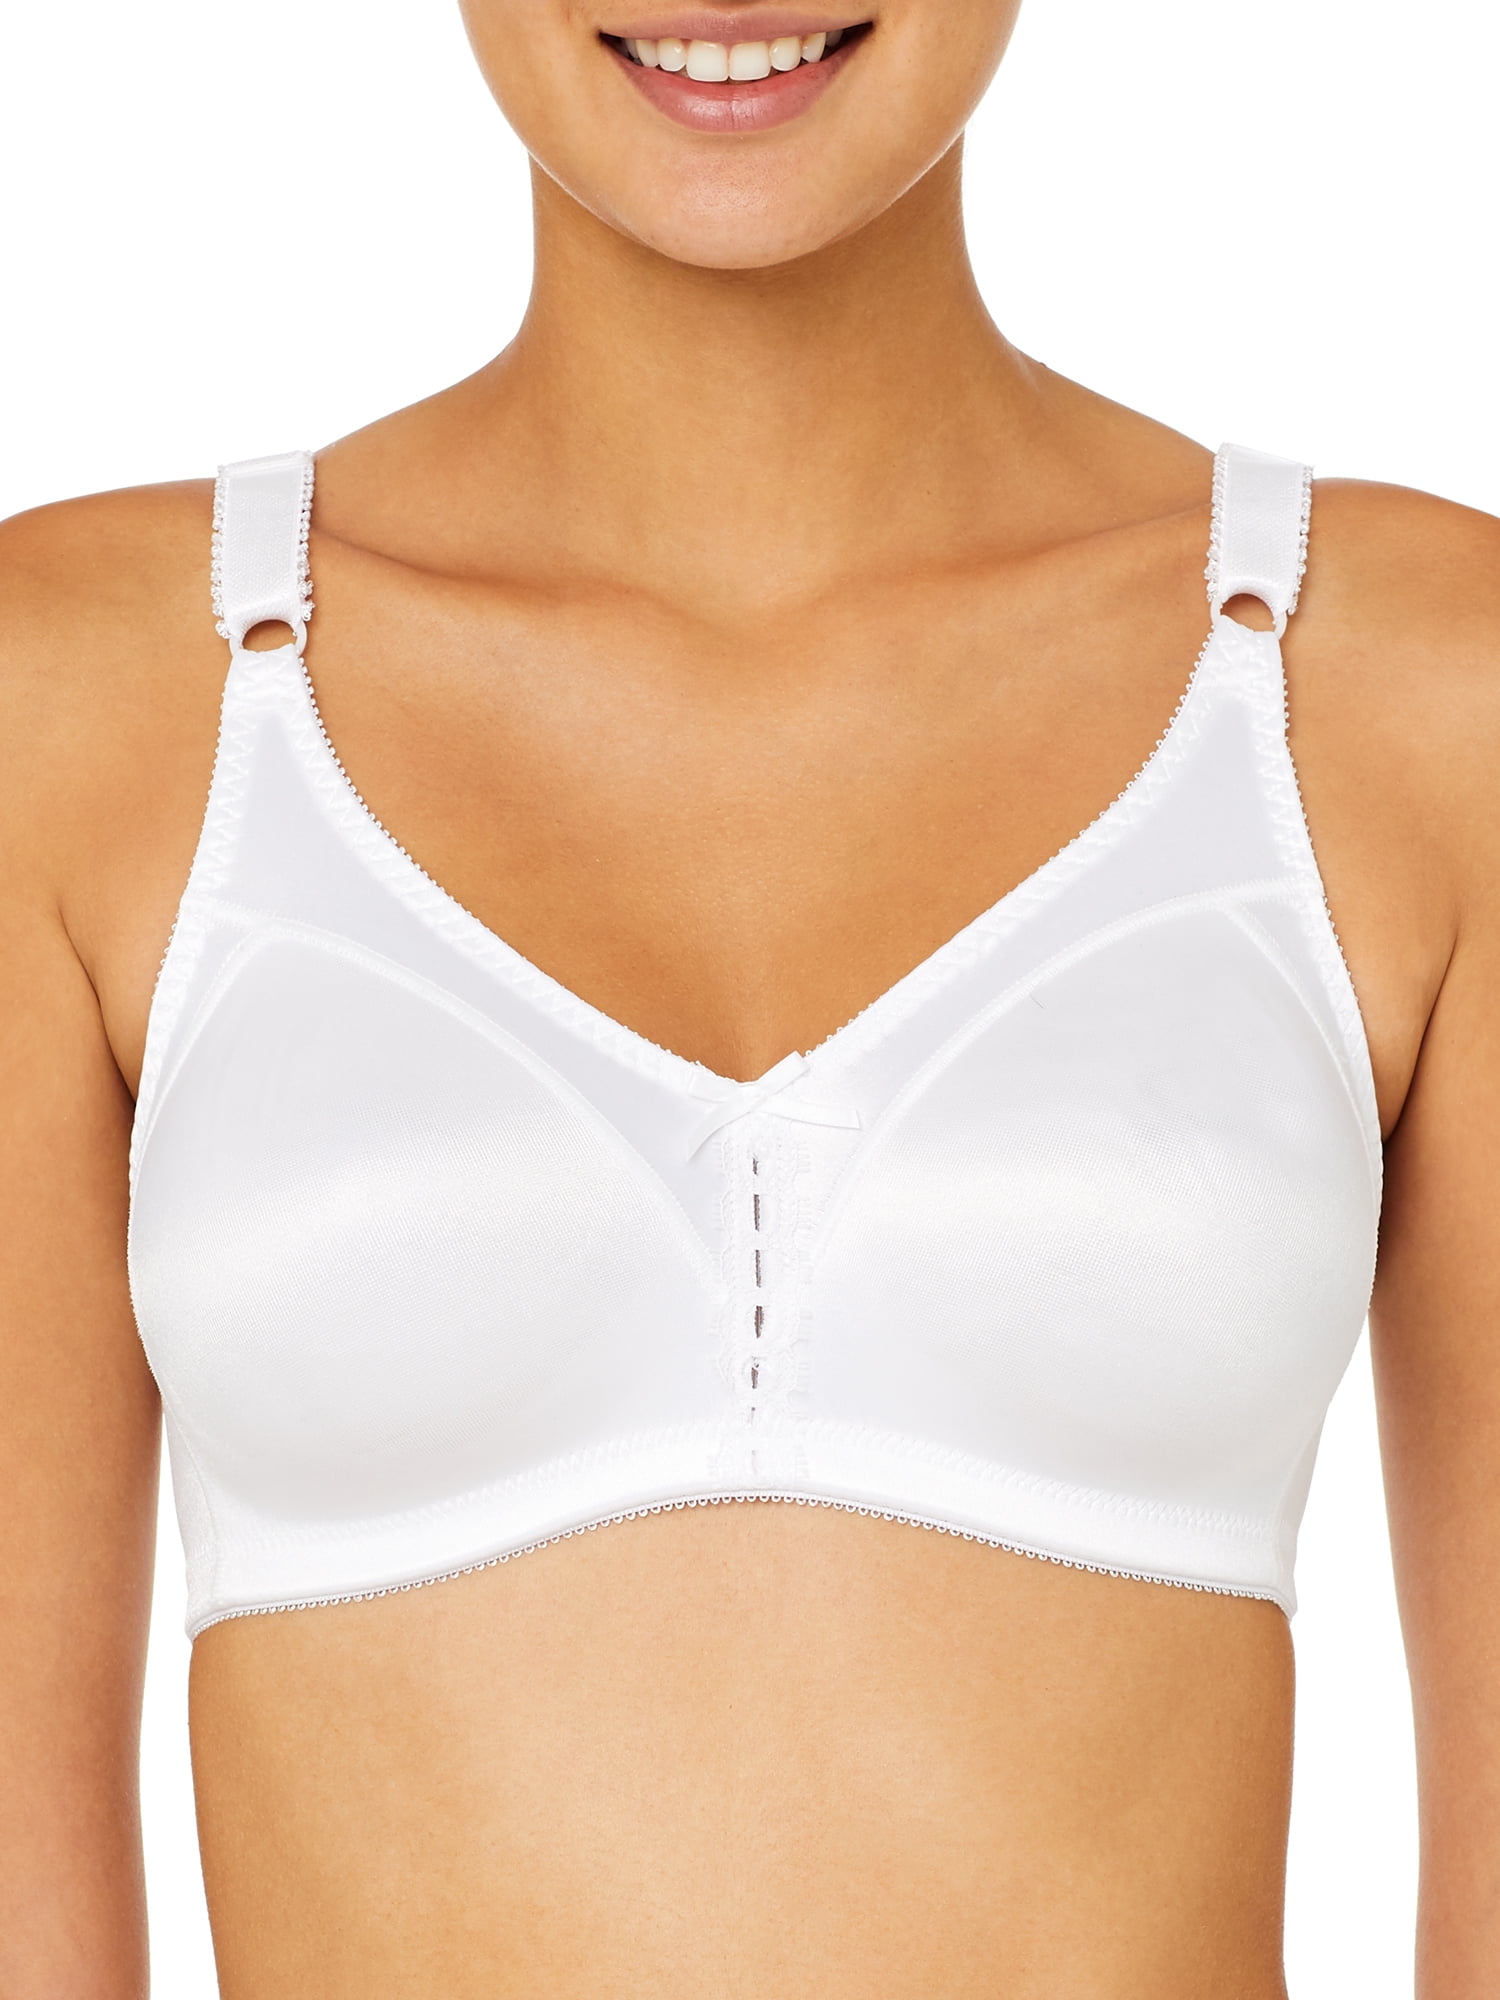 Women's Bali 3820 Double Support Cool Comfort Wirefree Bra (White